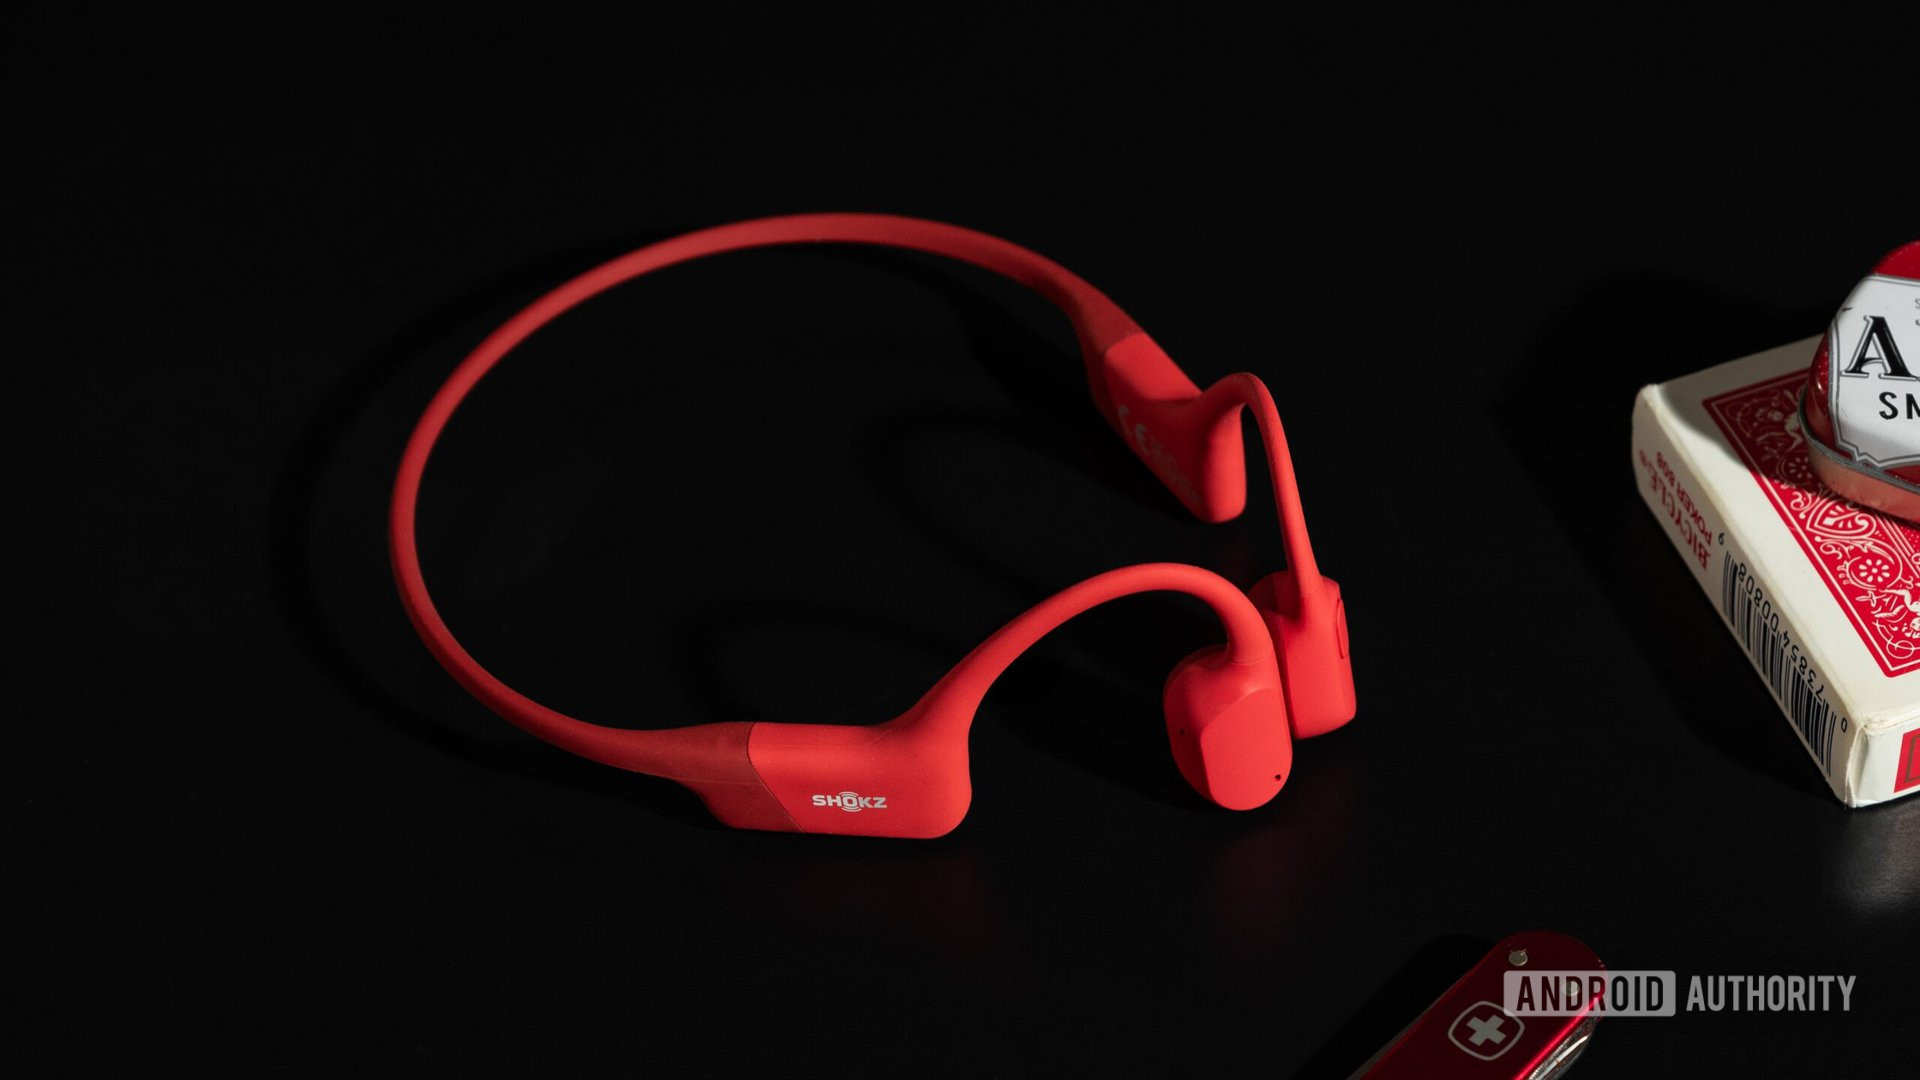 The Shokz OpenRun bone conduction headphones in red on a black surface.